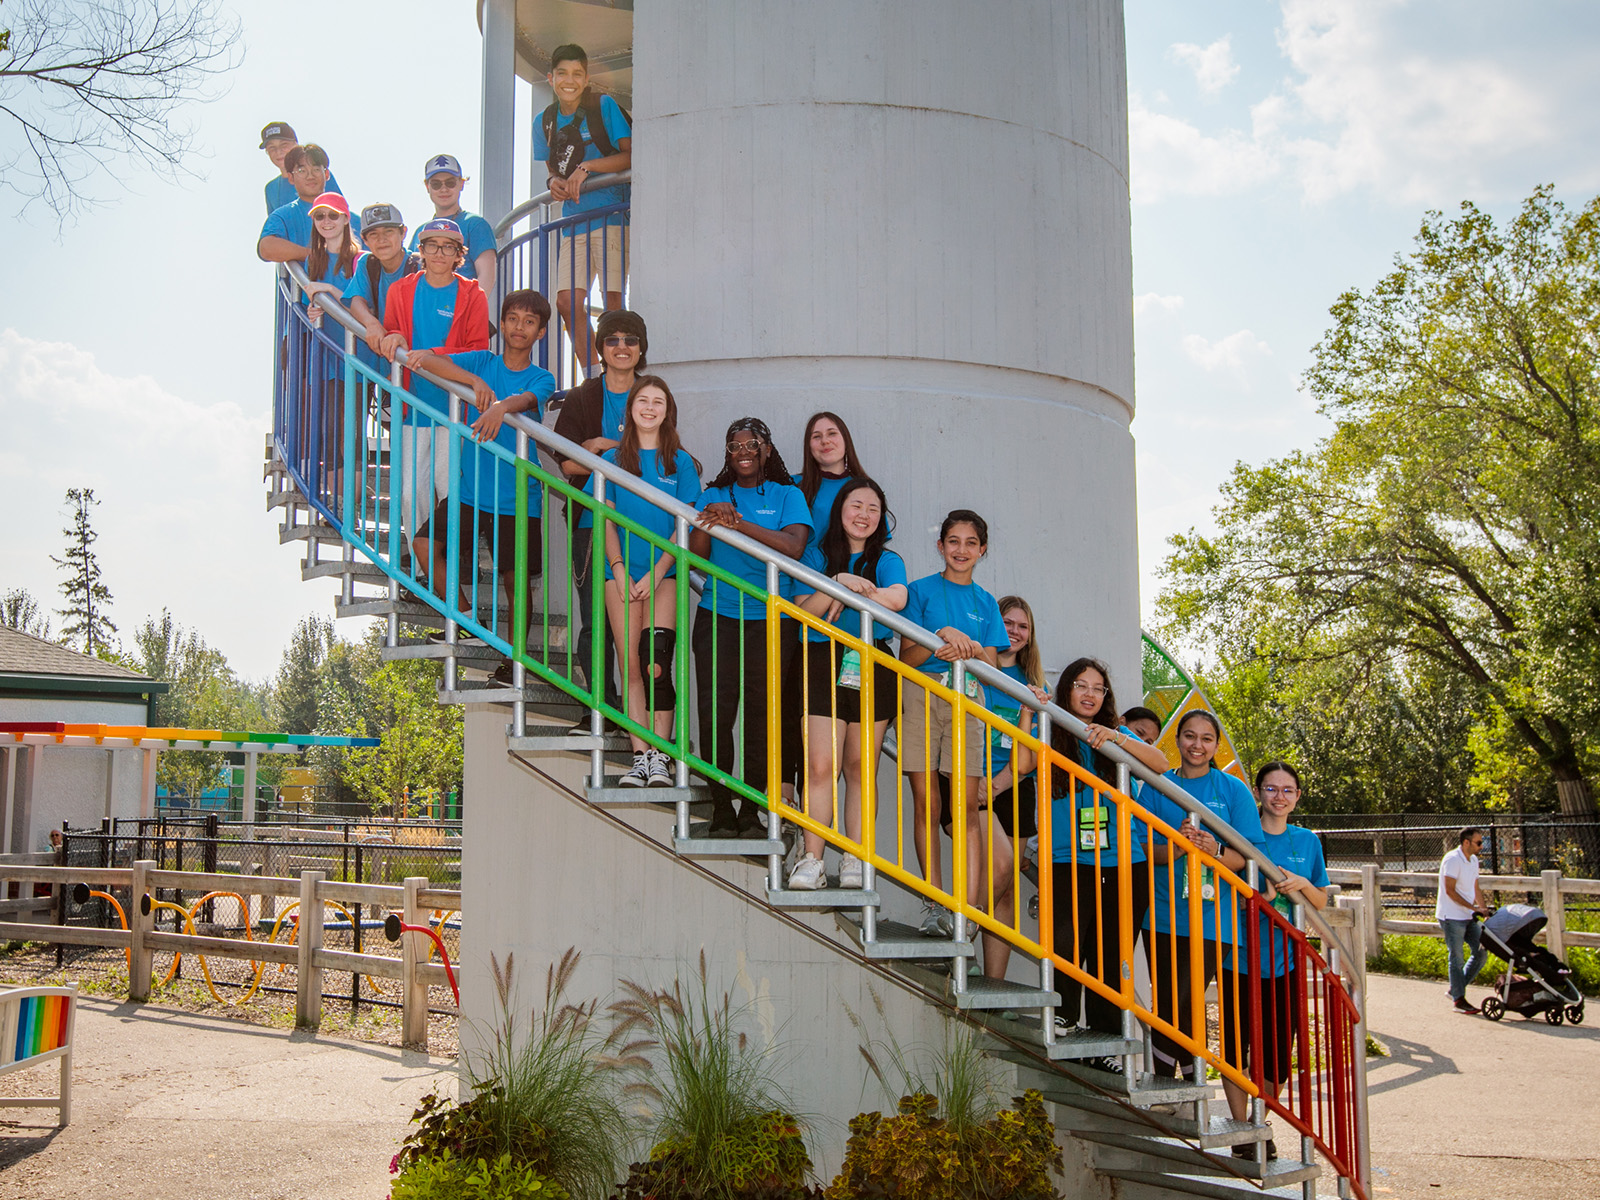 camp volunteers all stand together on a set of stairs outdoors